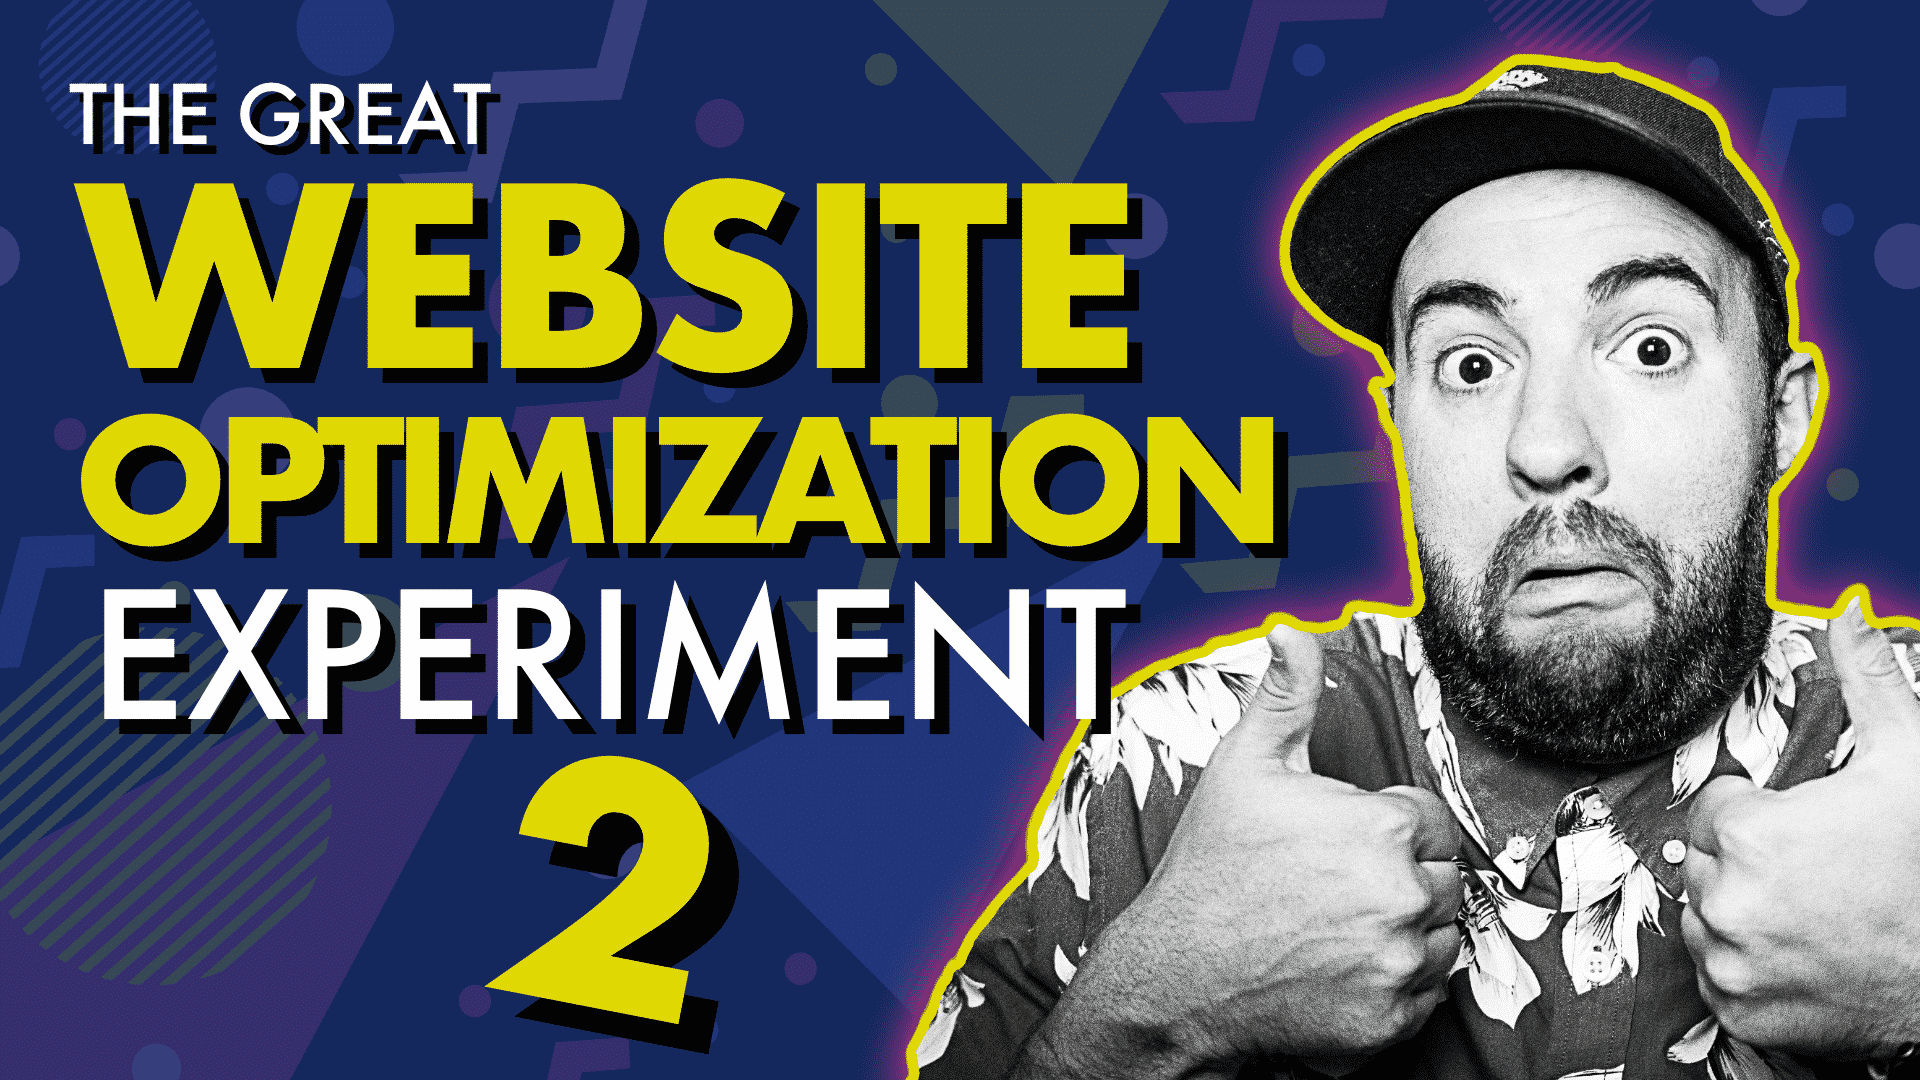 The Great Website Optimization Experiment 2